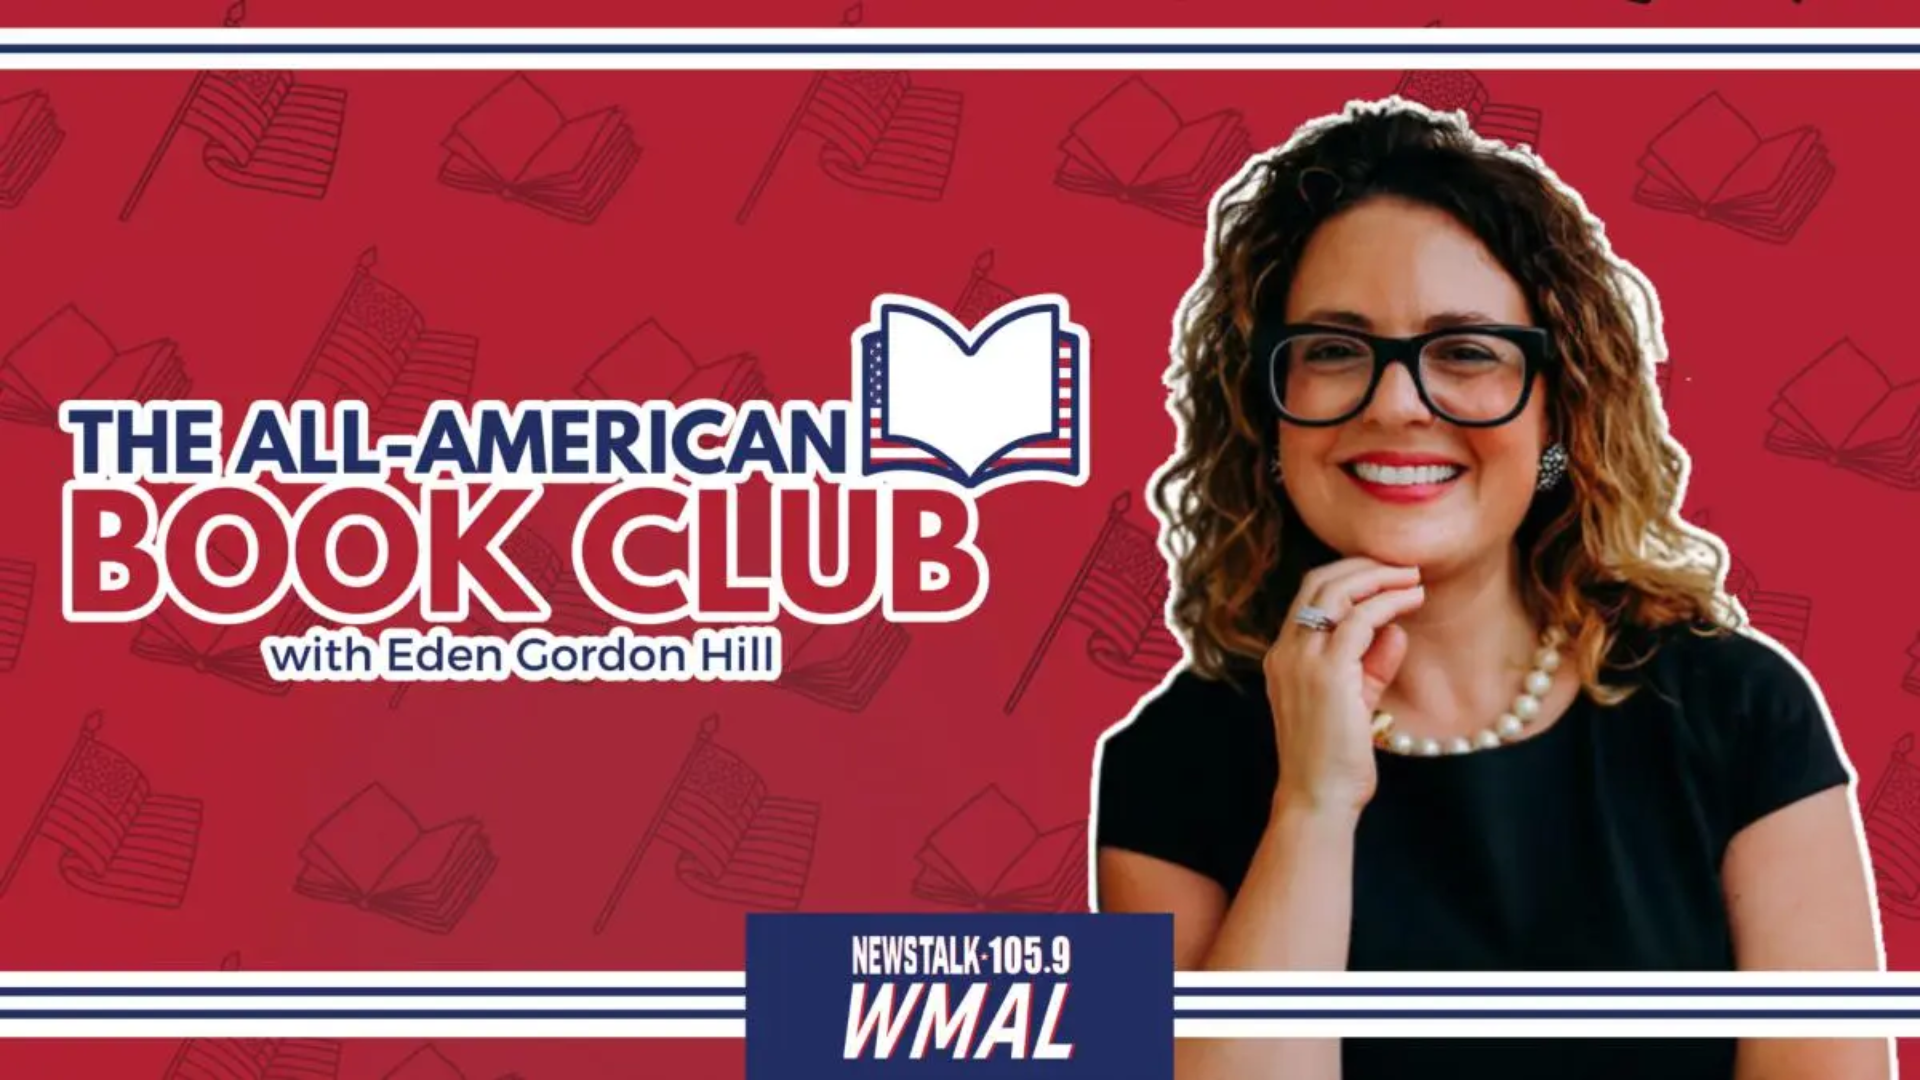 WMAL’s “The All-American Book Club” Welcomes Kathie Lee Gifford’s New Biblical Series “Herod and Mary”